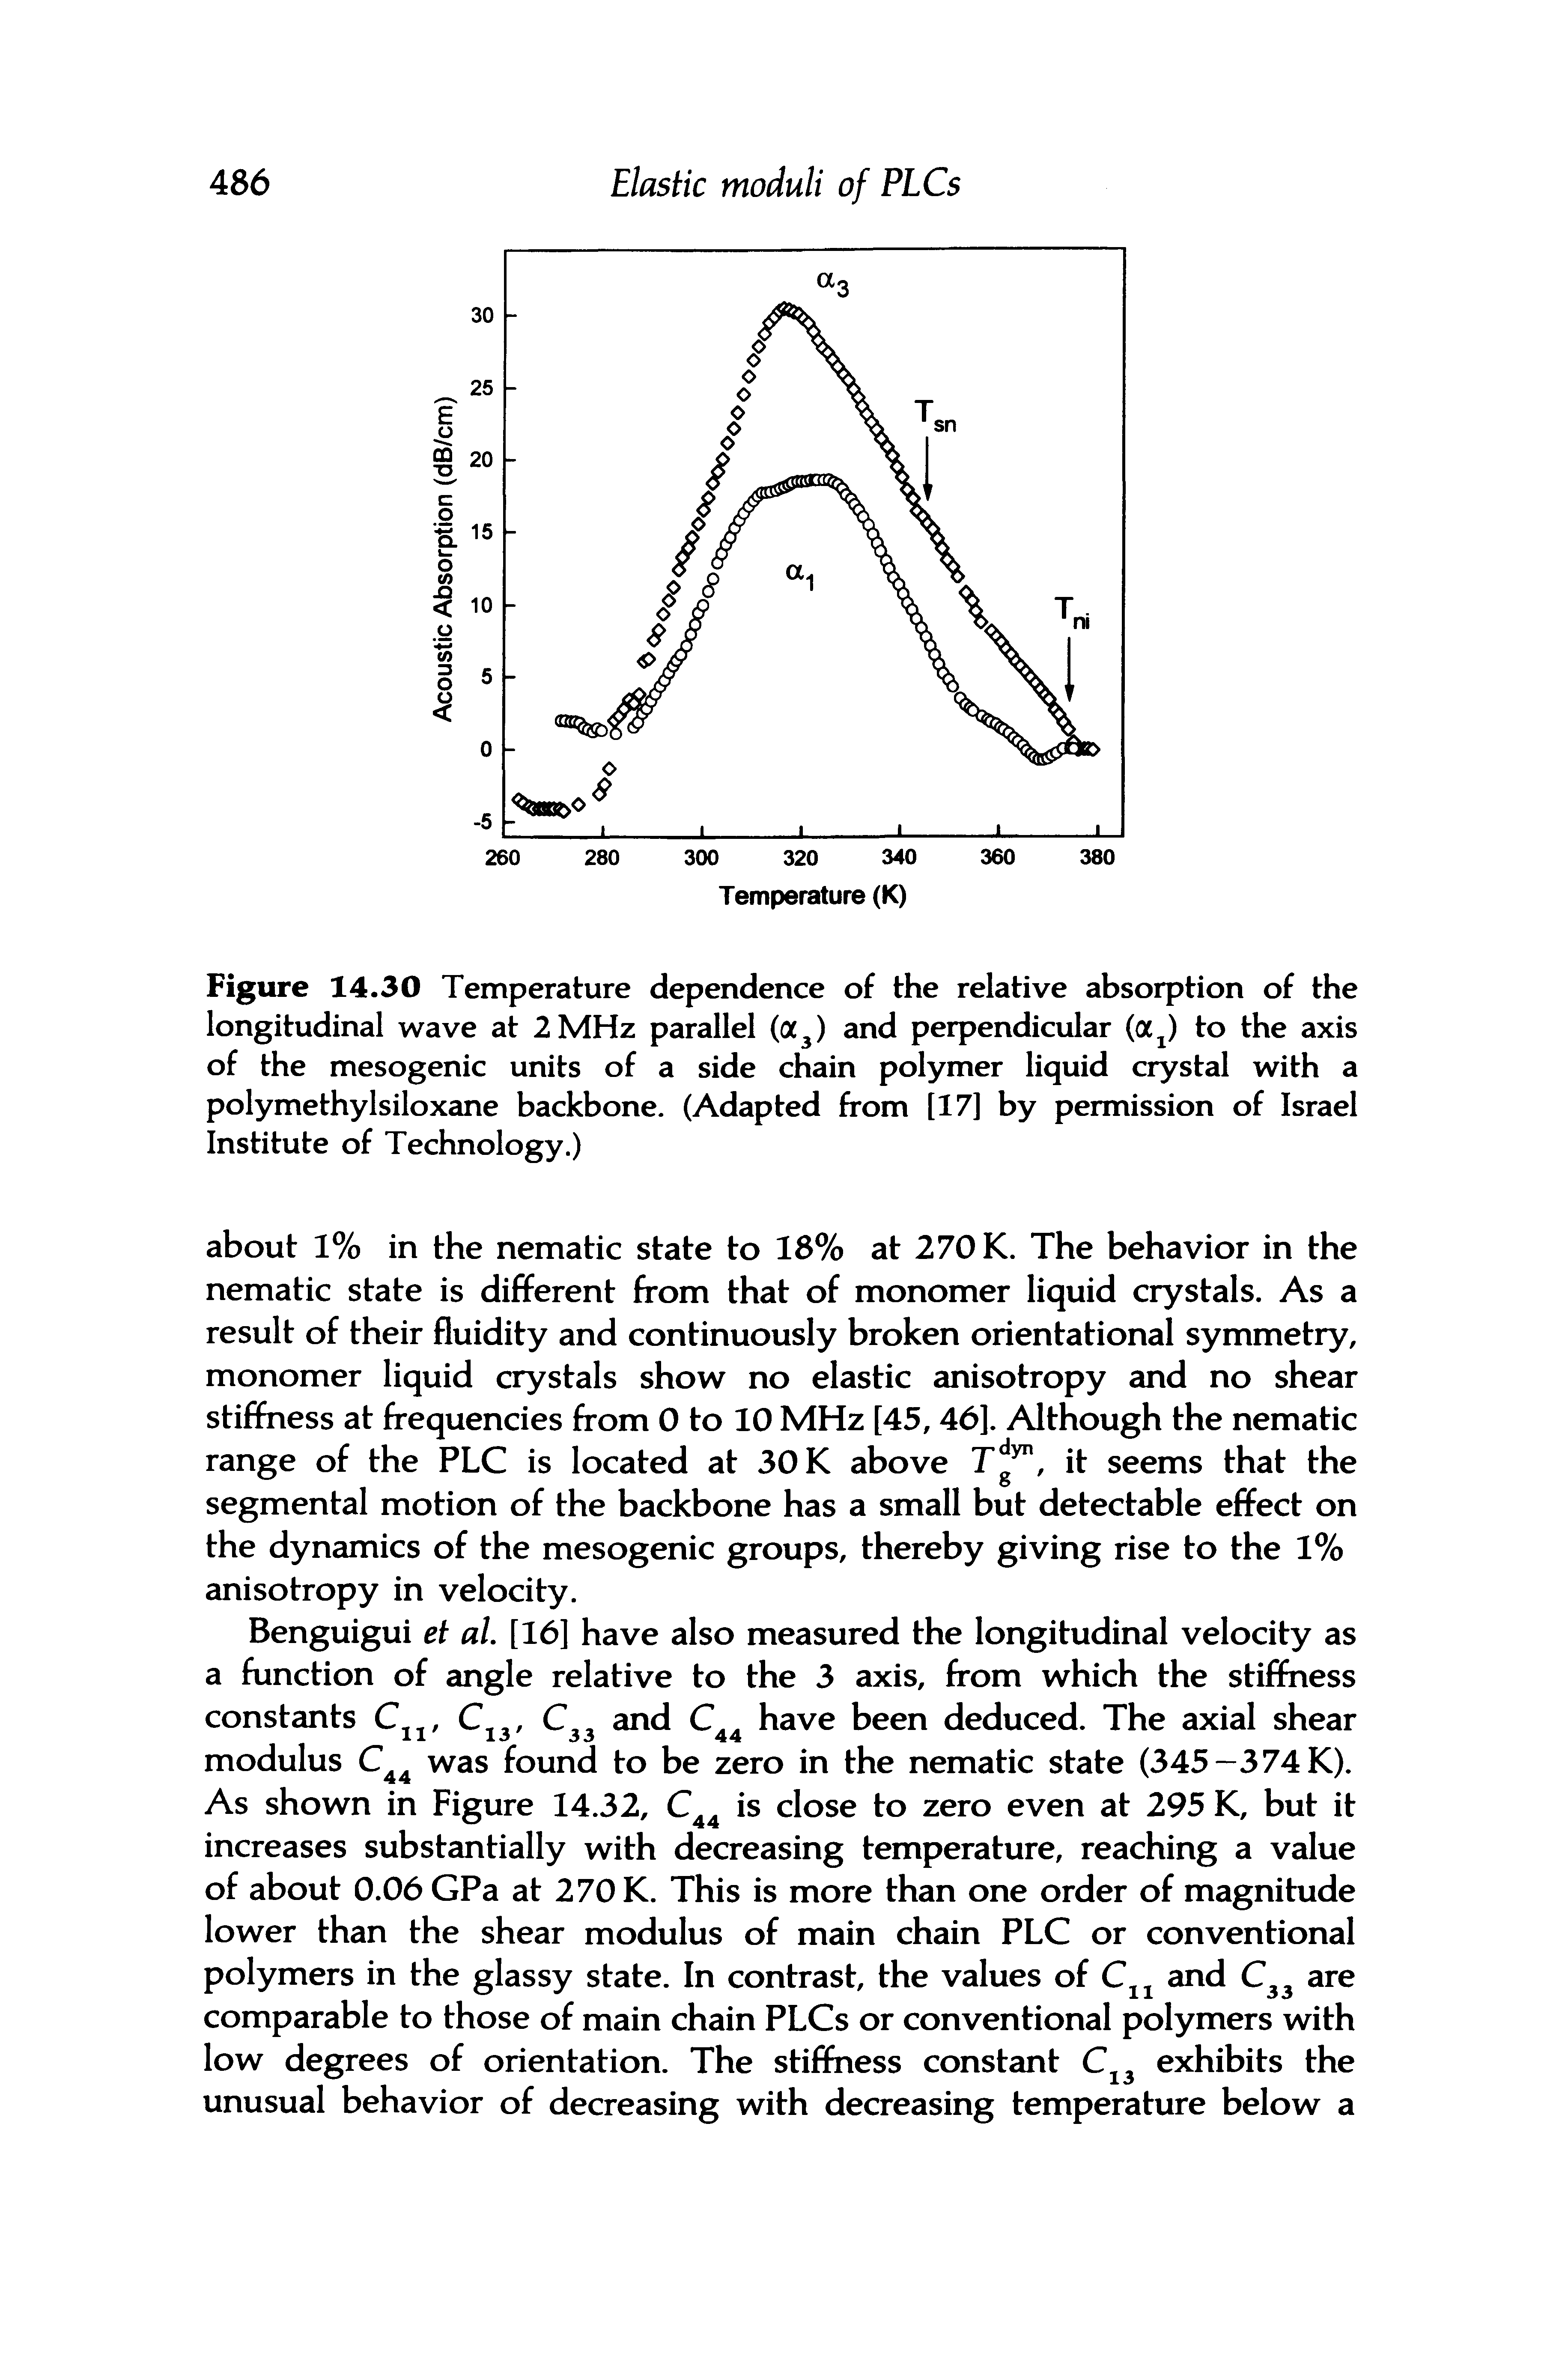 Figure 14.30 Temperature dependence of the relative absorption of the longitudinal wave at 2 MHz parallel (a ) and perpendicular (a ) to the axis of the mesogenic units of a side chain polymer liquid crystal with a polymethylsiloxane backbone. (Adapted from [17] by permission of Israel Institute of Technology.)...